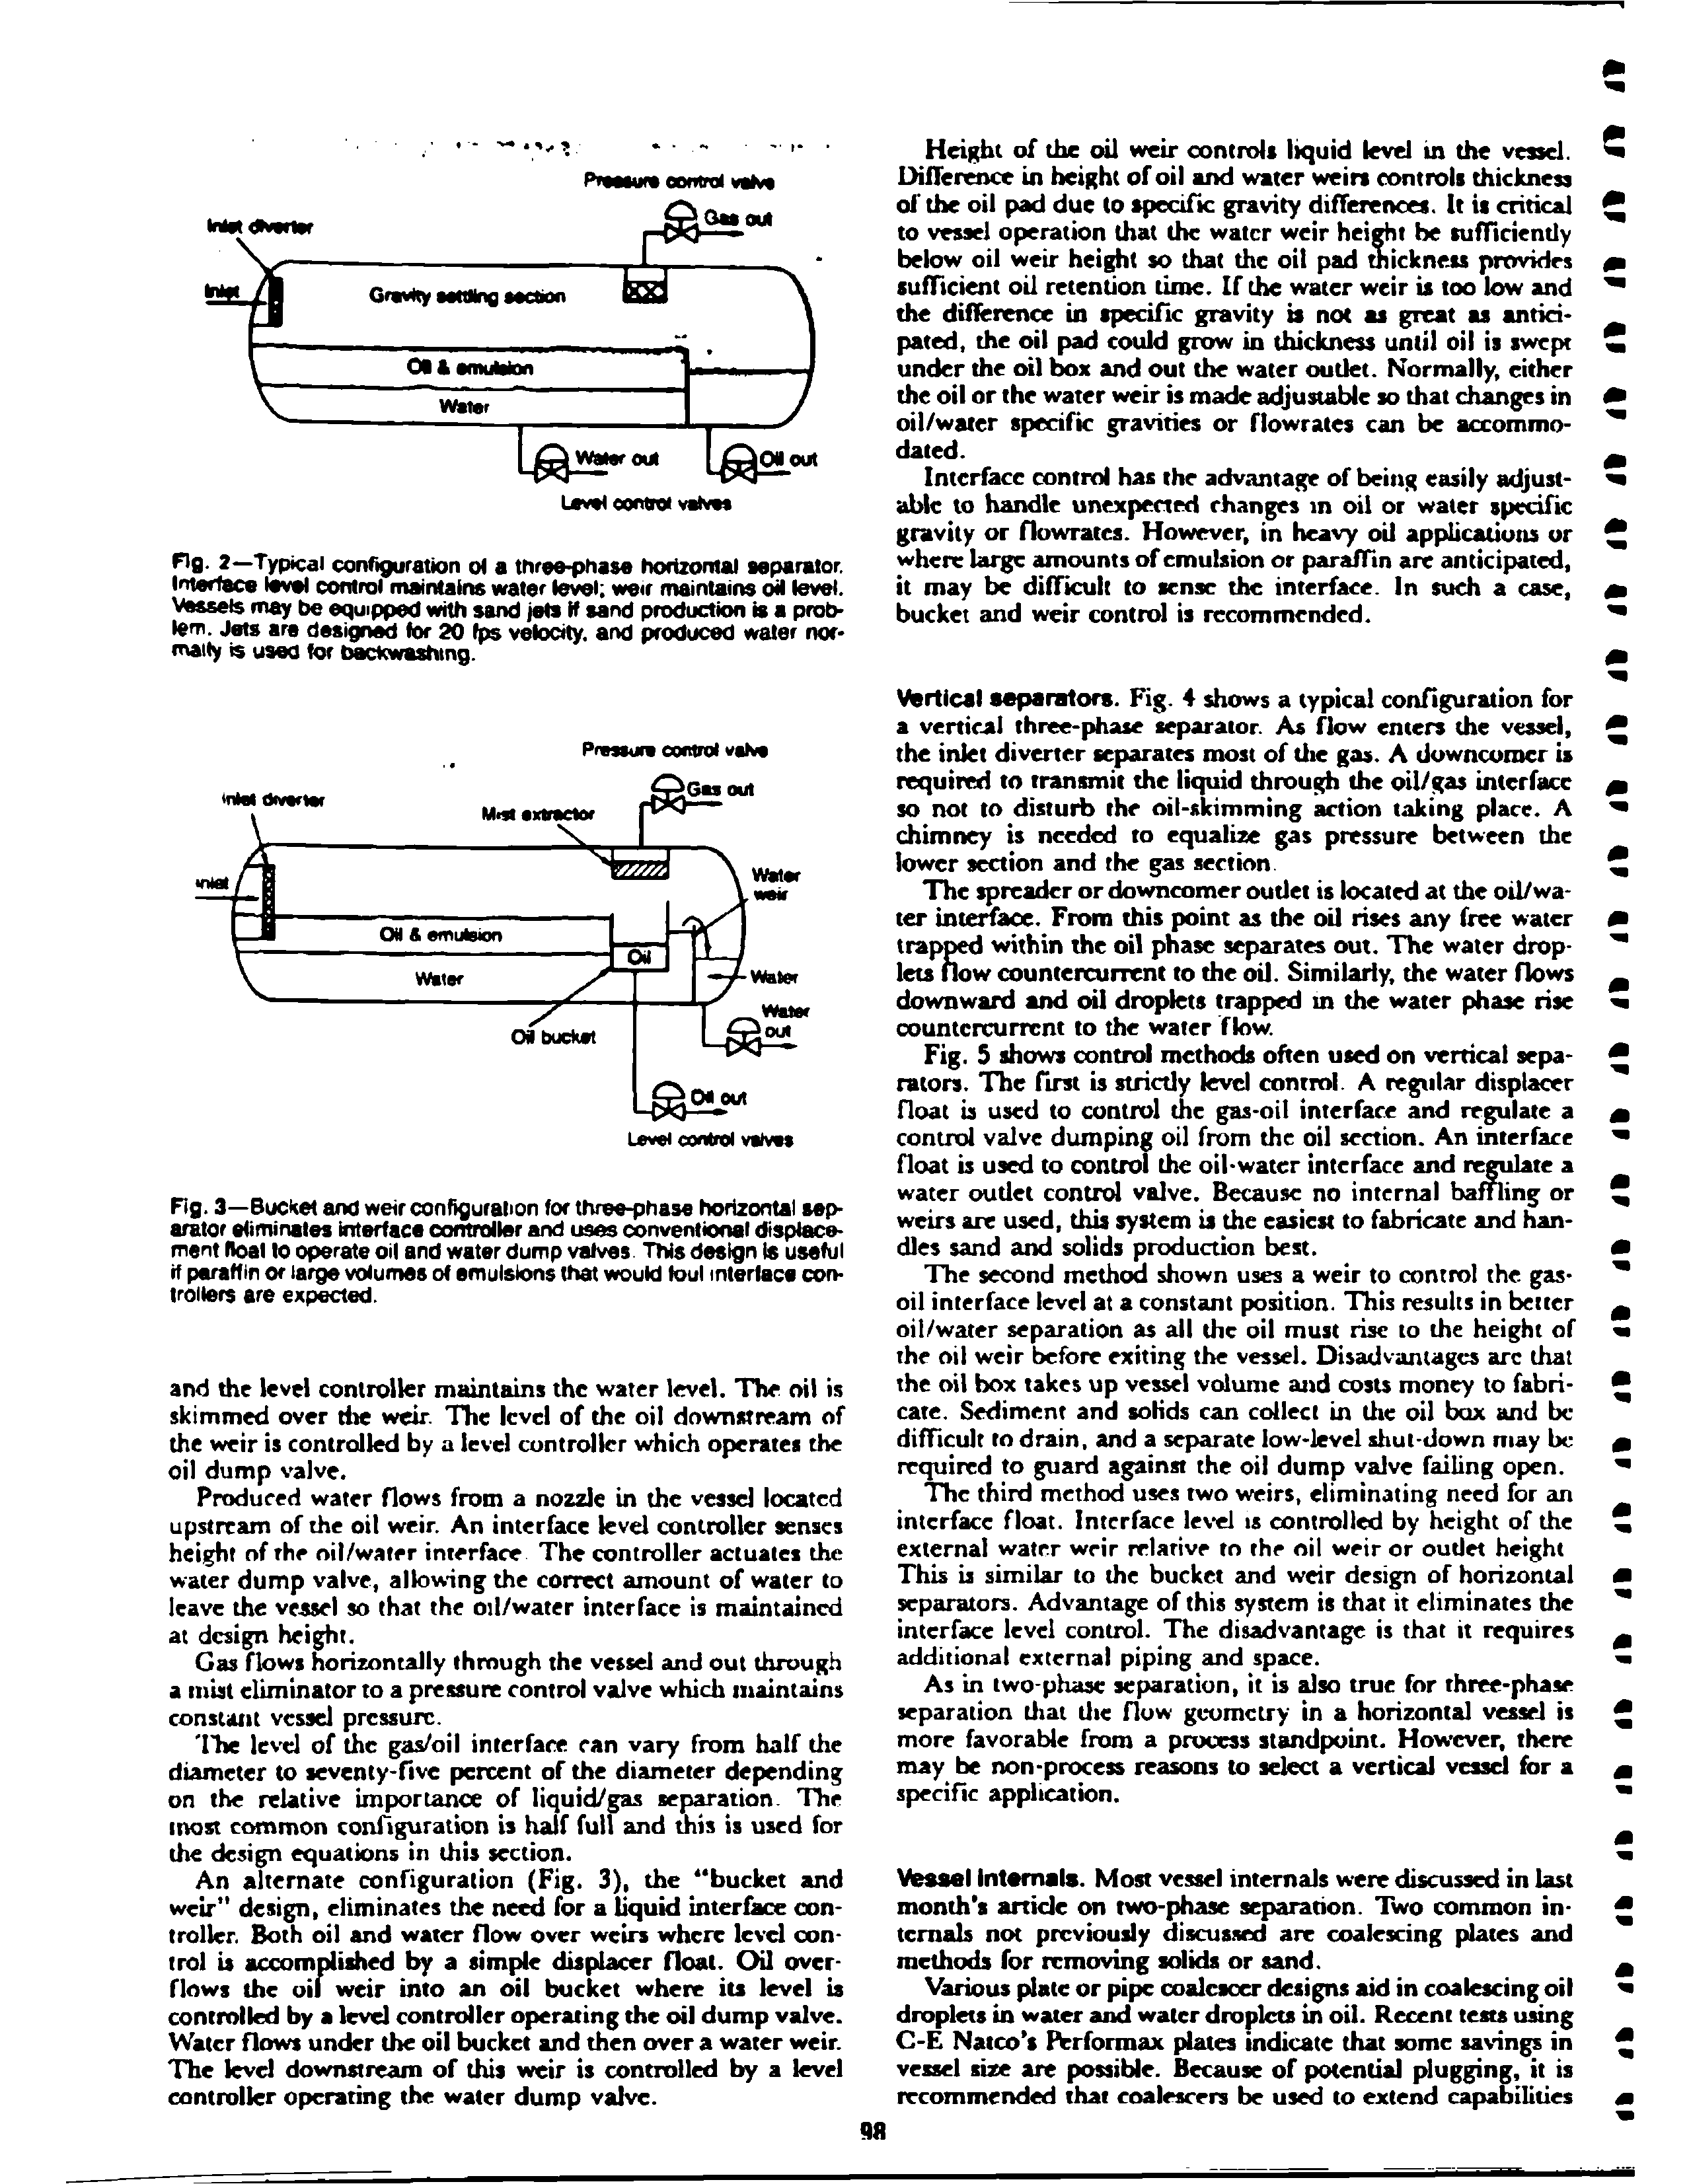 Fig. 3—Bucket and weir configuration for three-phase horizontal separator eliminates interface controller and uses conventional displacement fioal lo operate oil and water dump valves This design is useful if paraffin or large volumes o emulsions that would loul interlace controllers are expected.